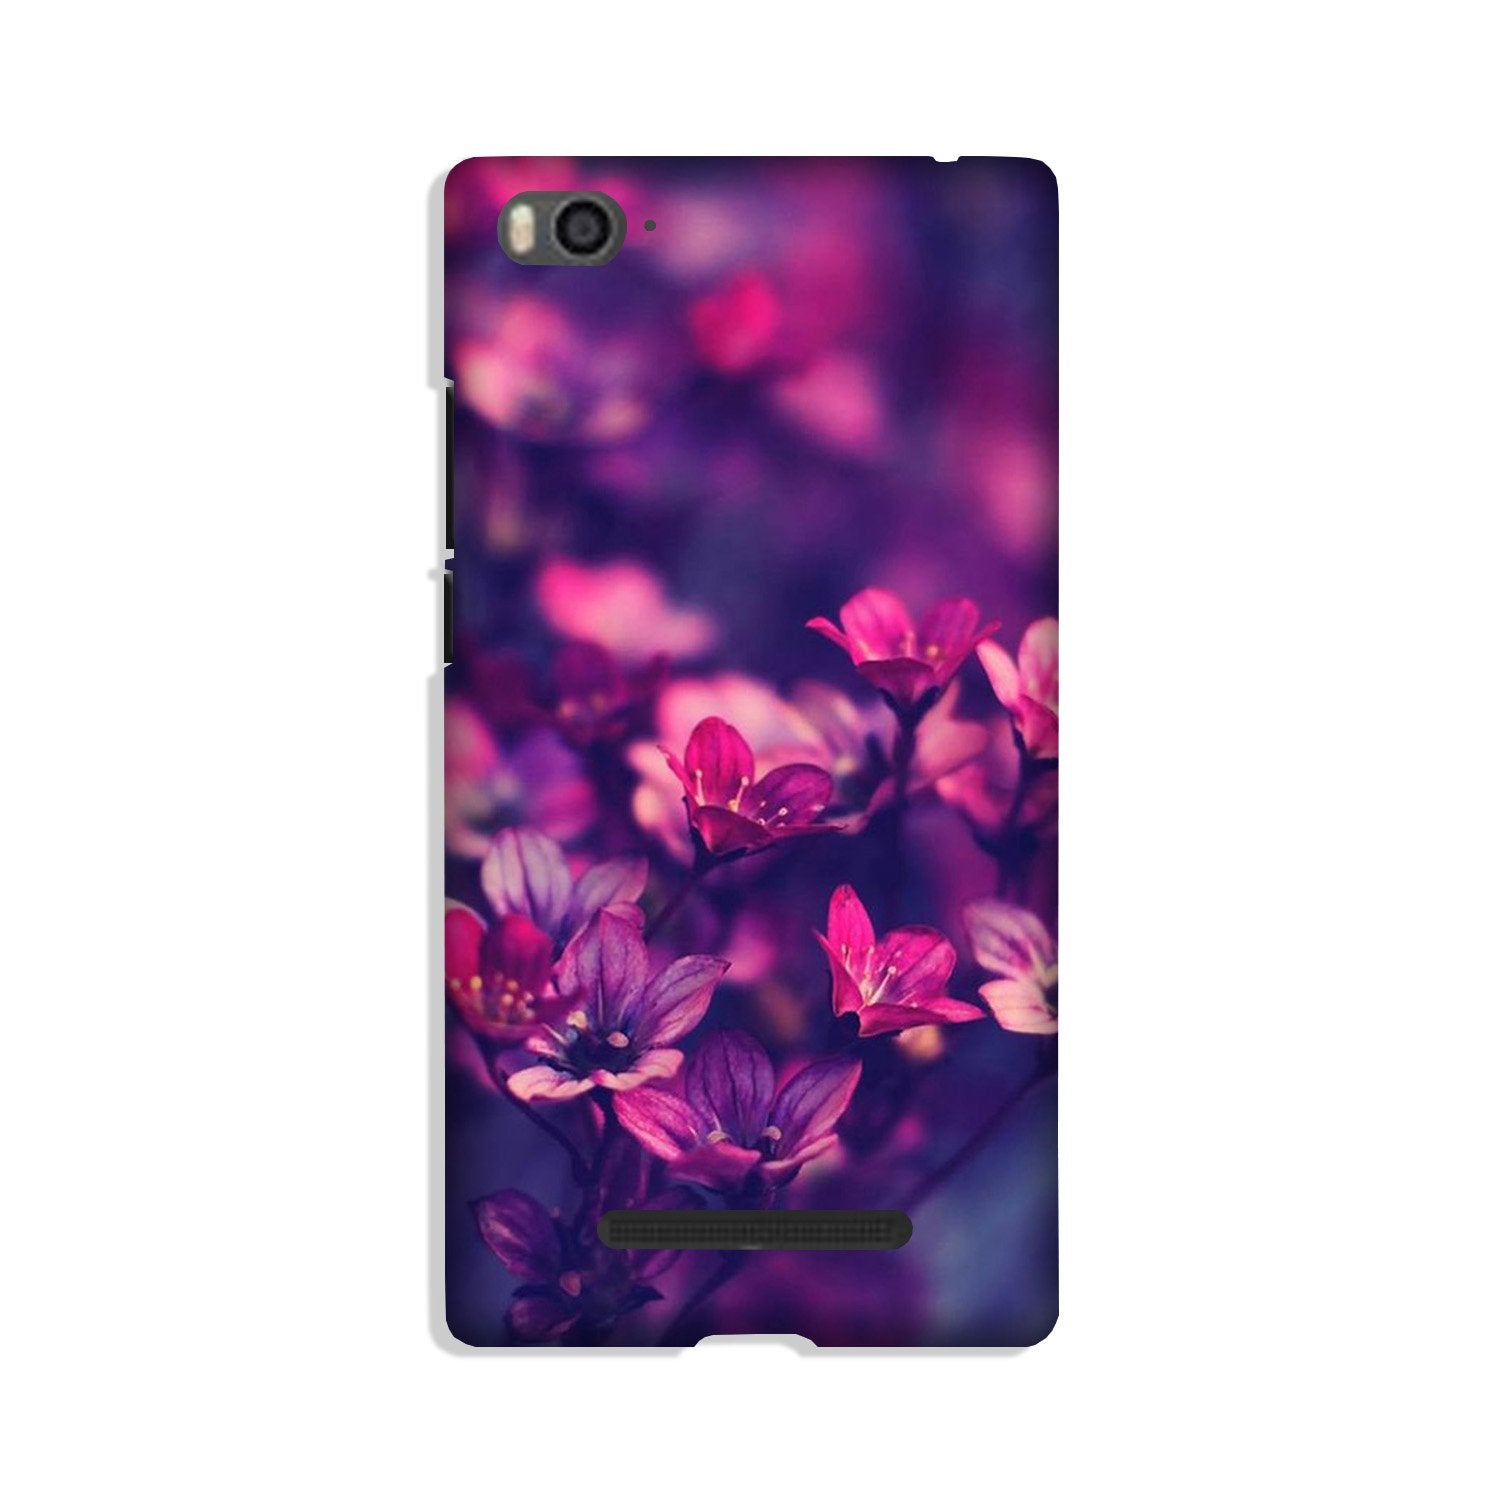 flowers Case for Redmi 4A